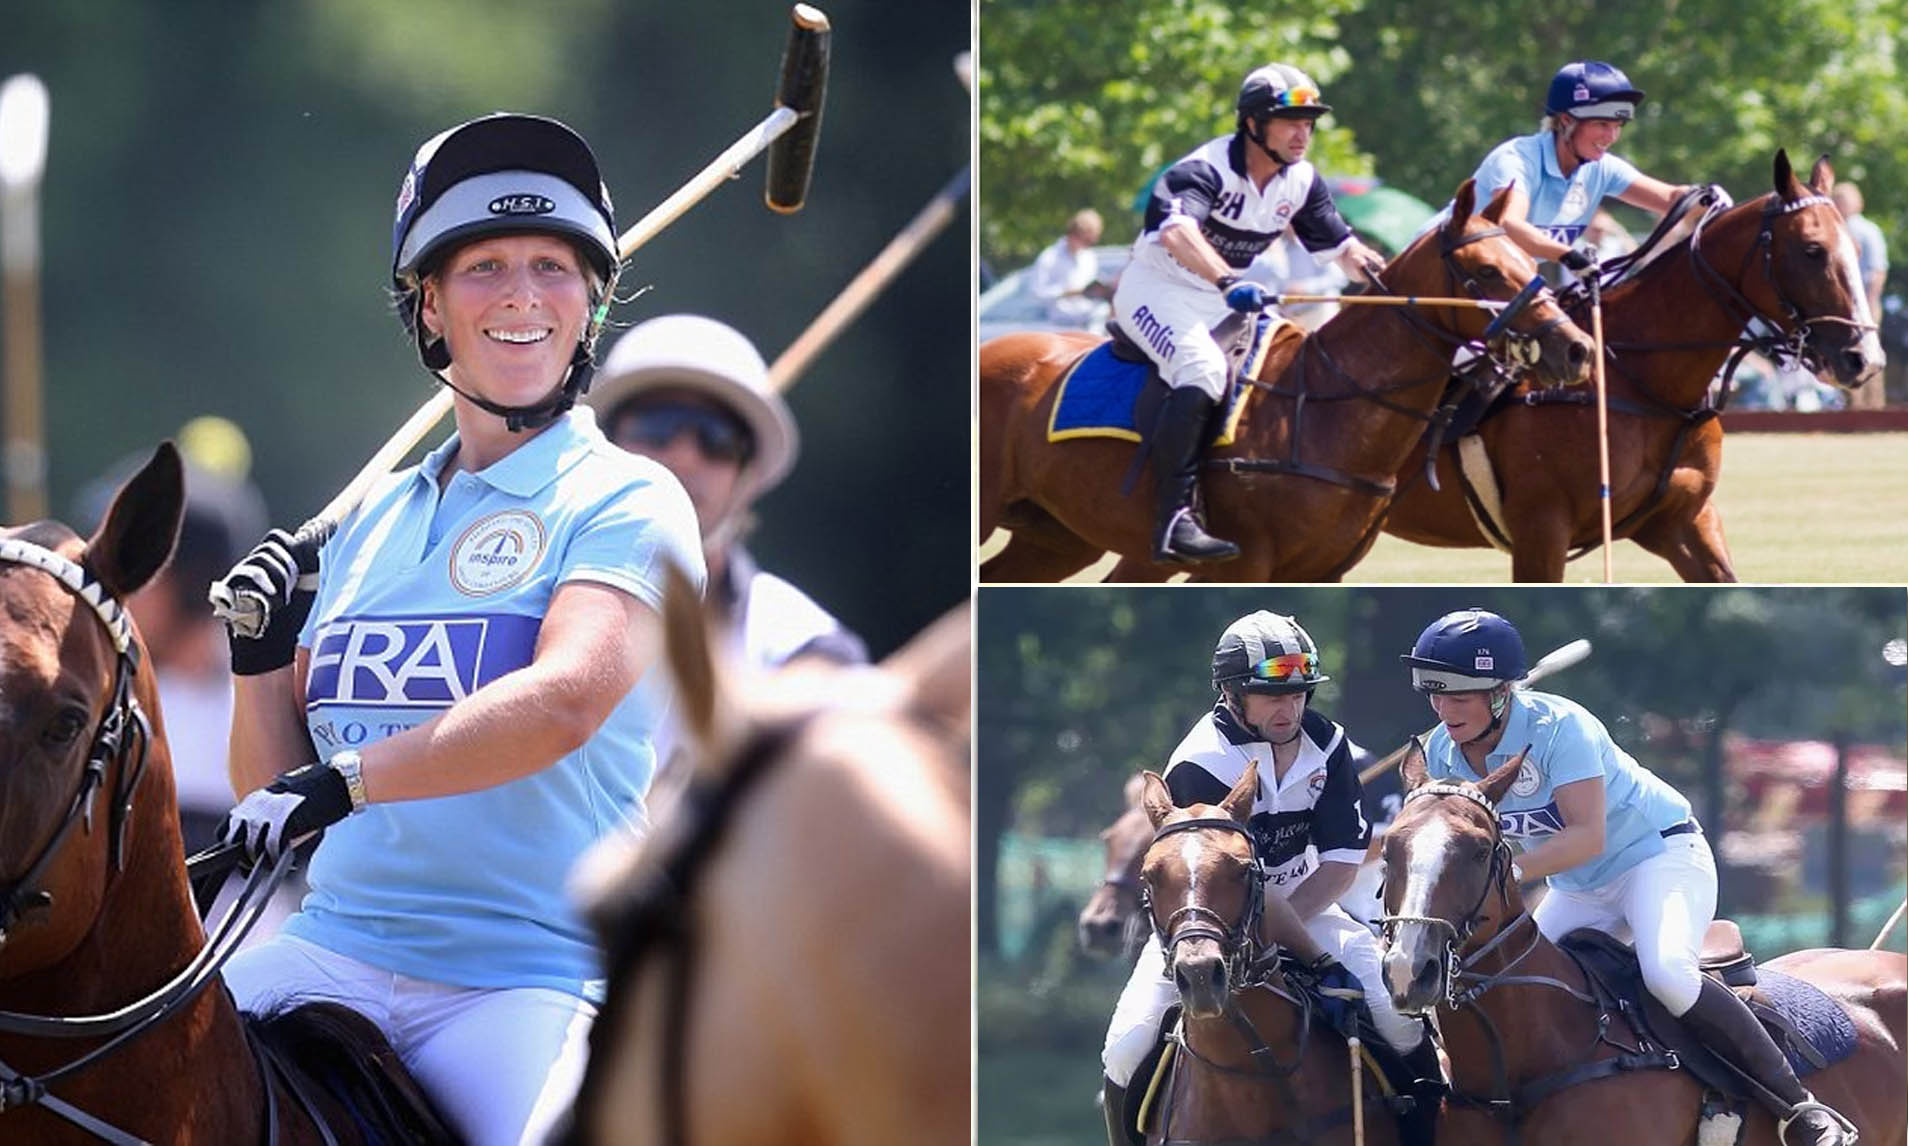 The Gloucestershire Festival of Polo